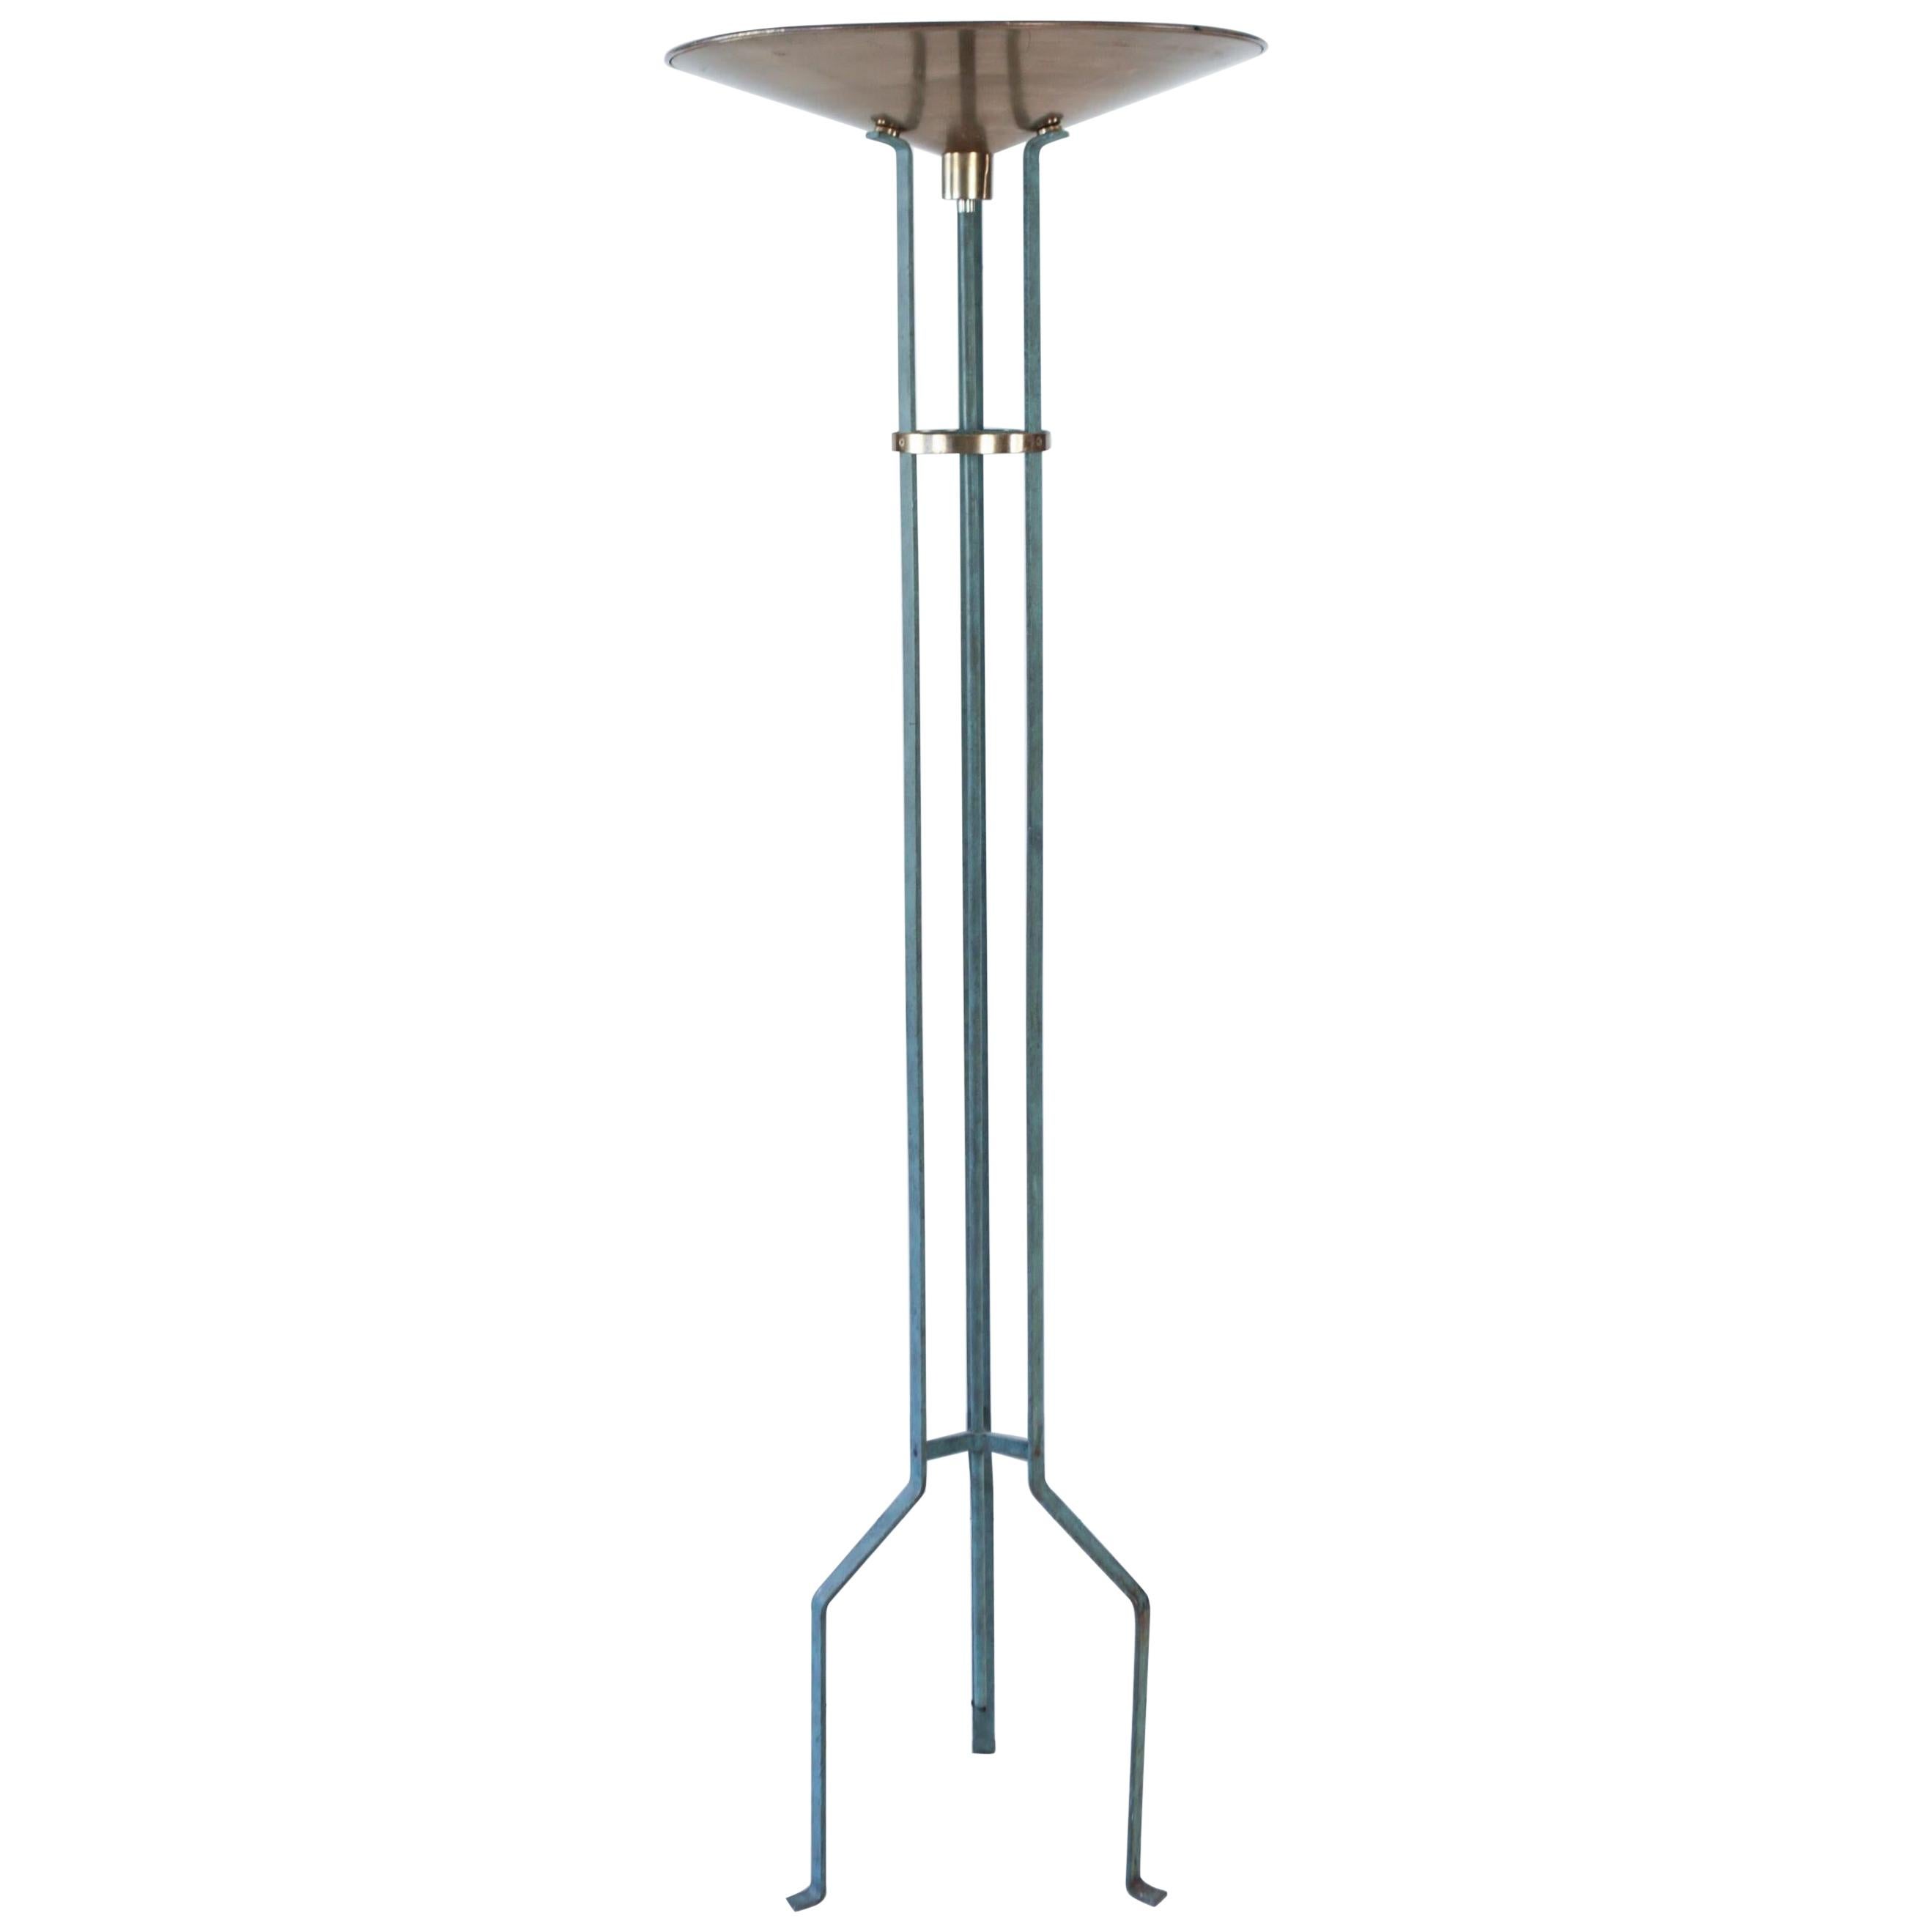 Monumental Italian Modernist Brass and Iron Torchiere Floor Lamp, 1970s